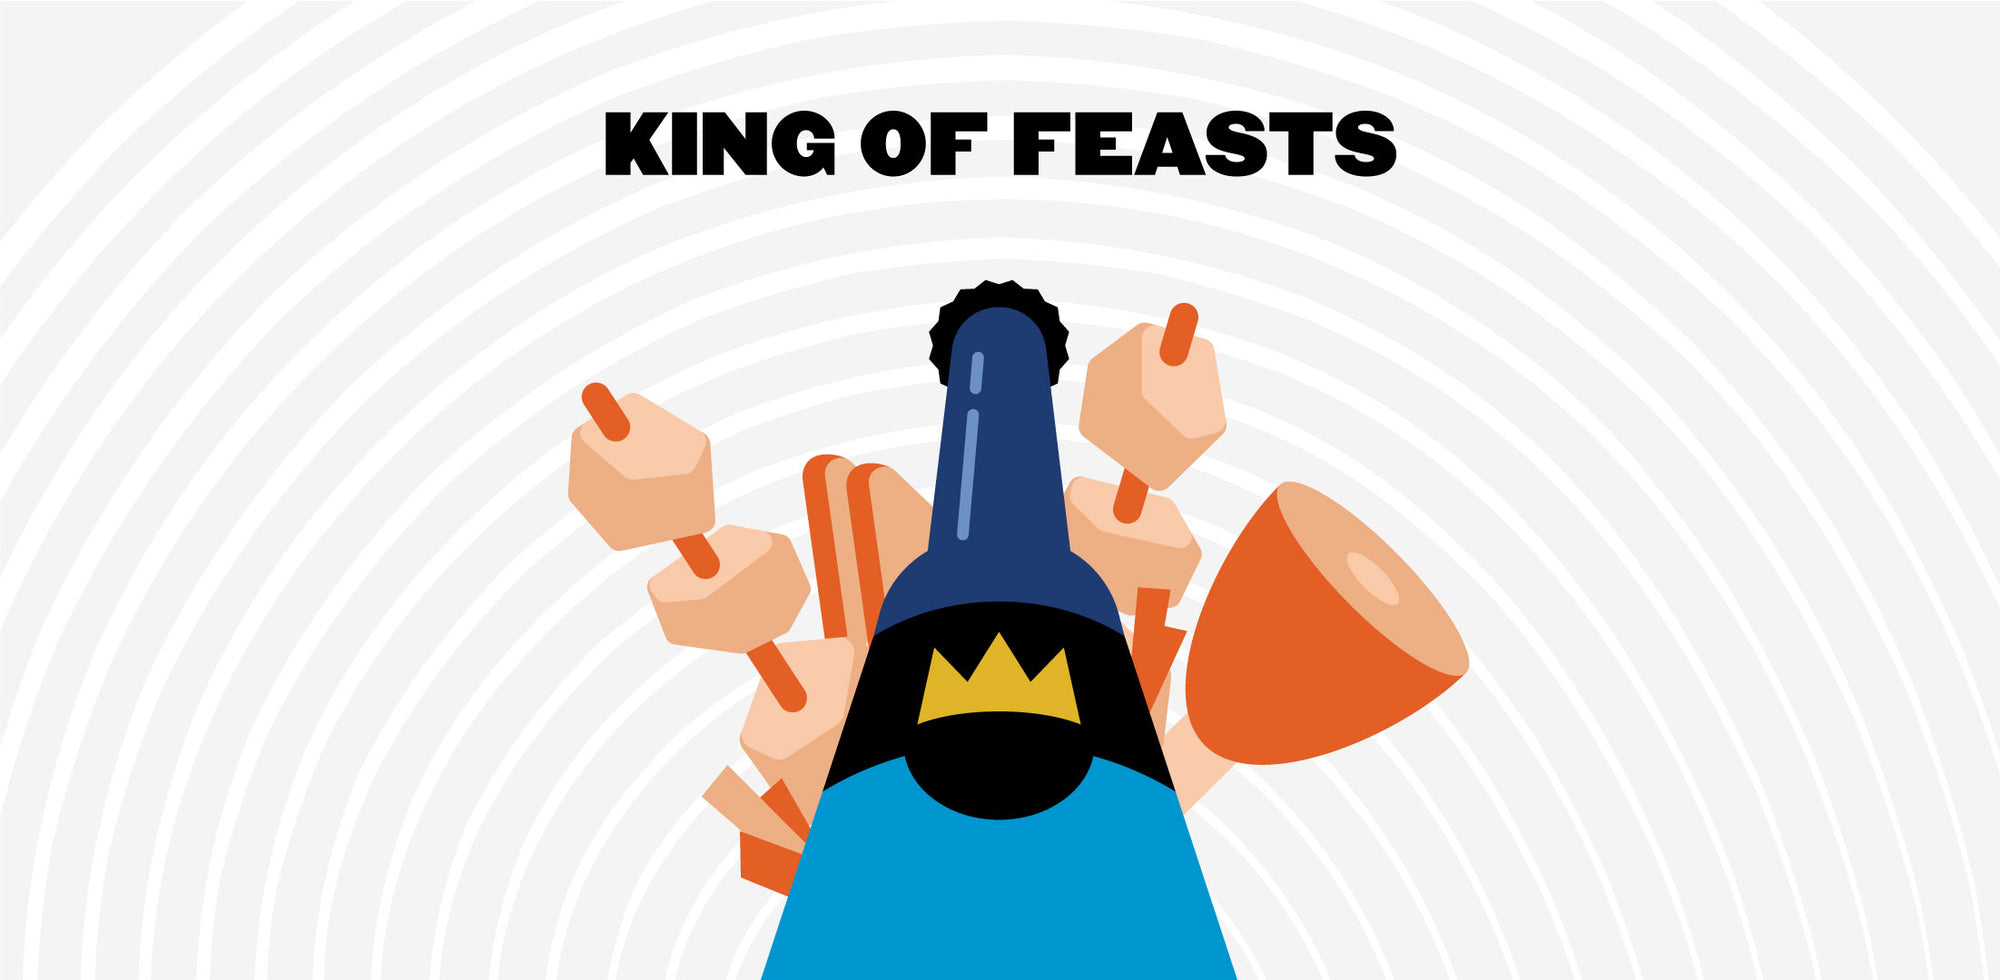 Food for Chefs on their days off: King of Feasts takeaway pop up residency at Bellfield Brewery